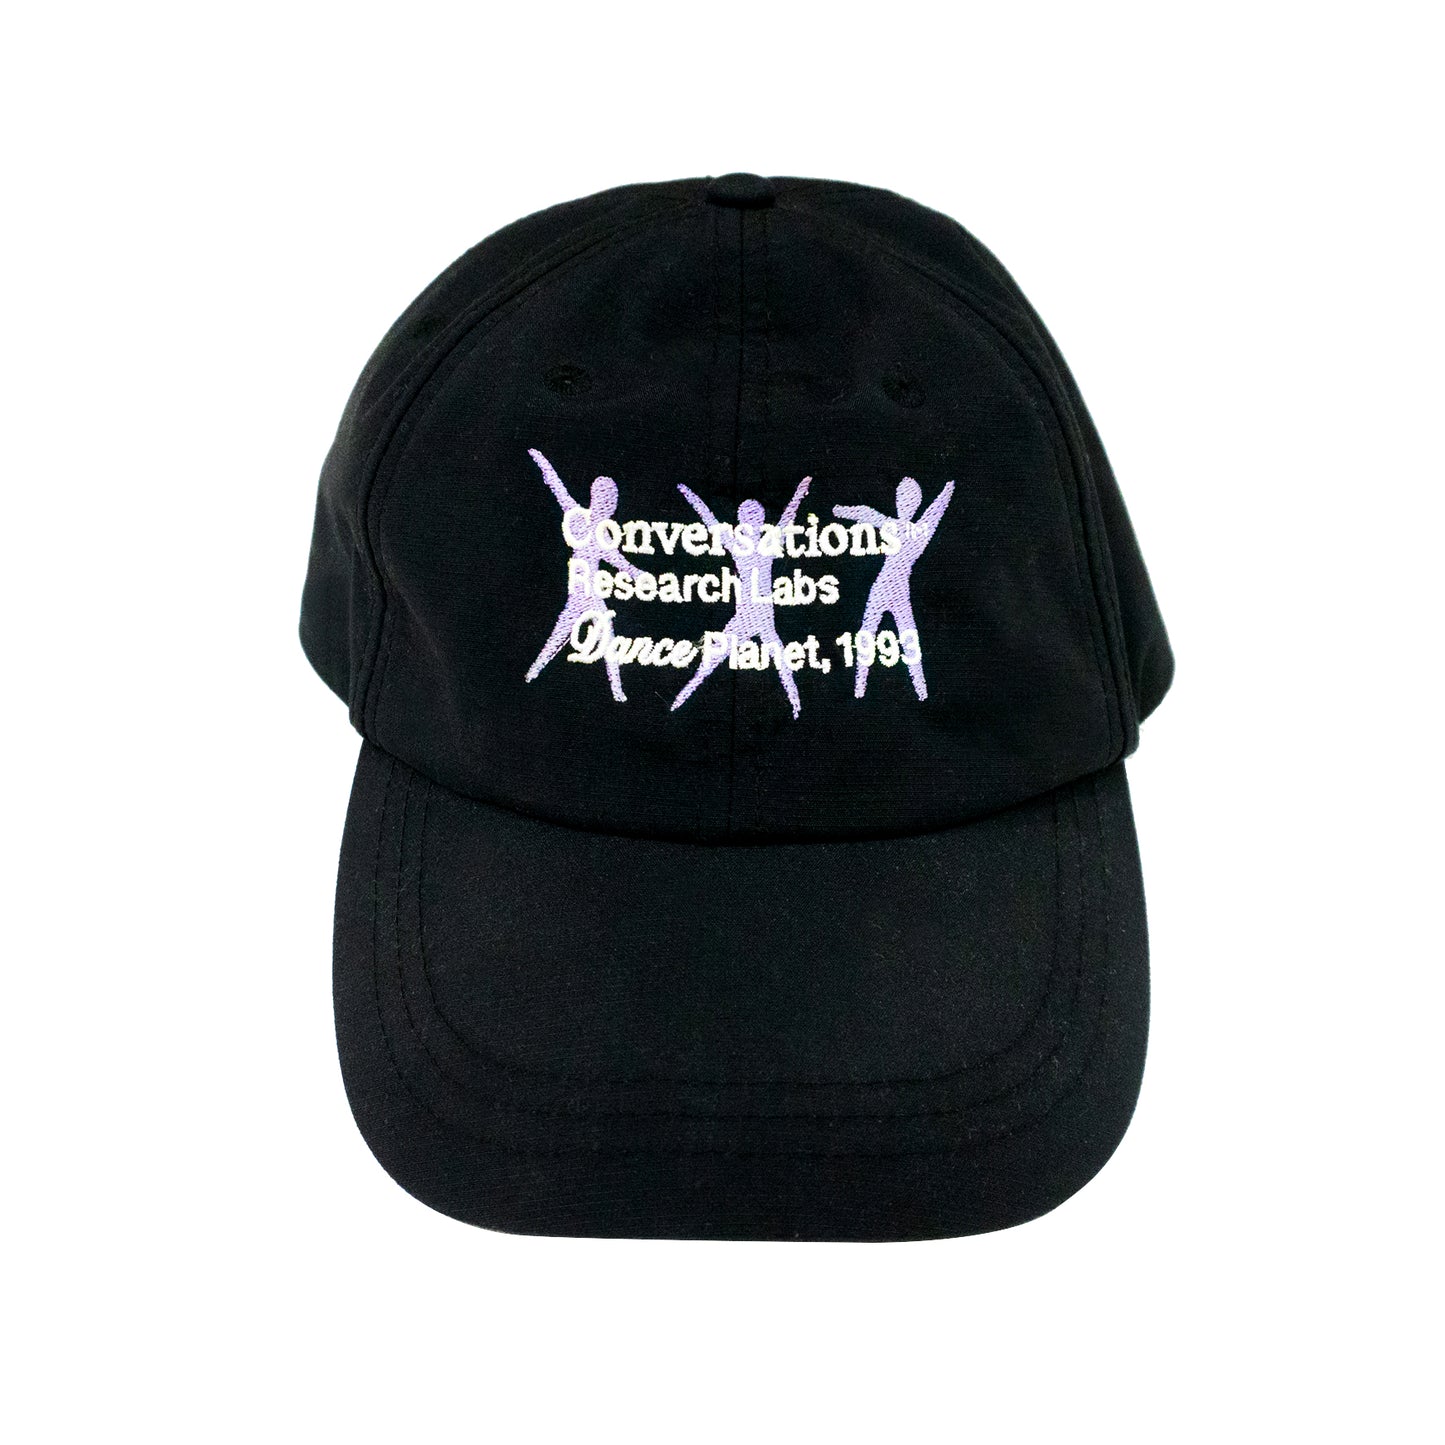 S/S23 Embroidered 'Research Labs' Cap [black]